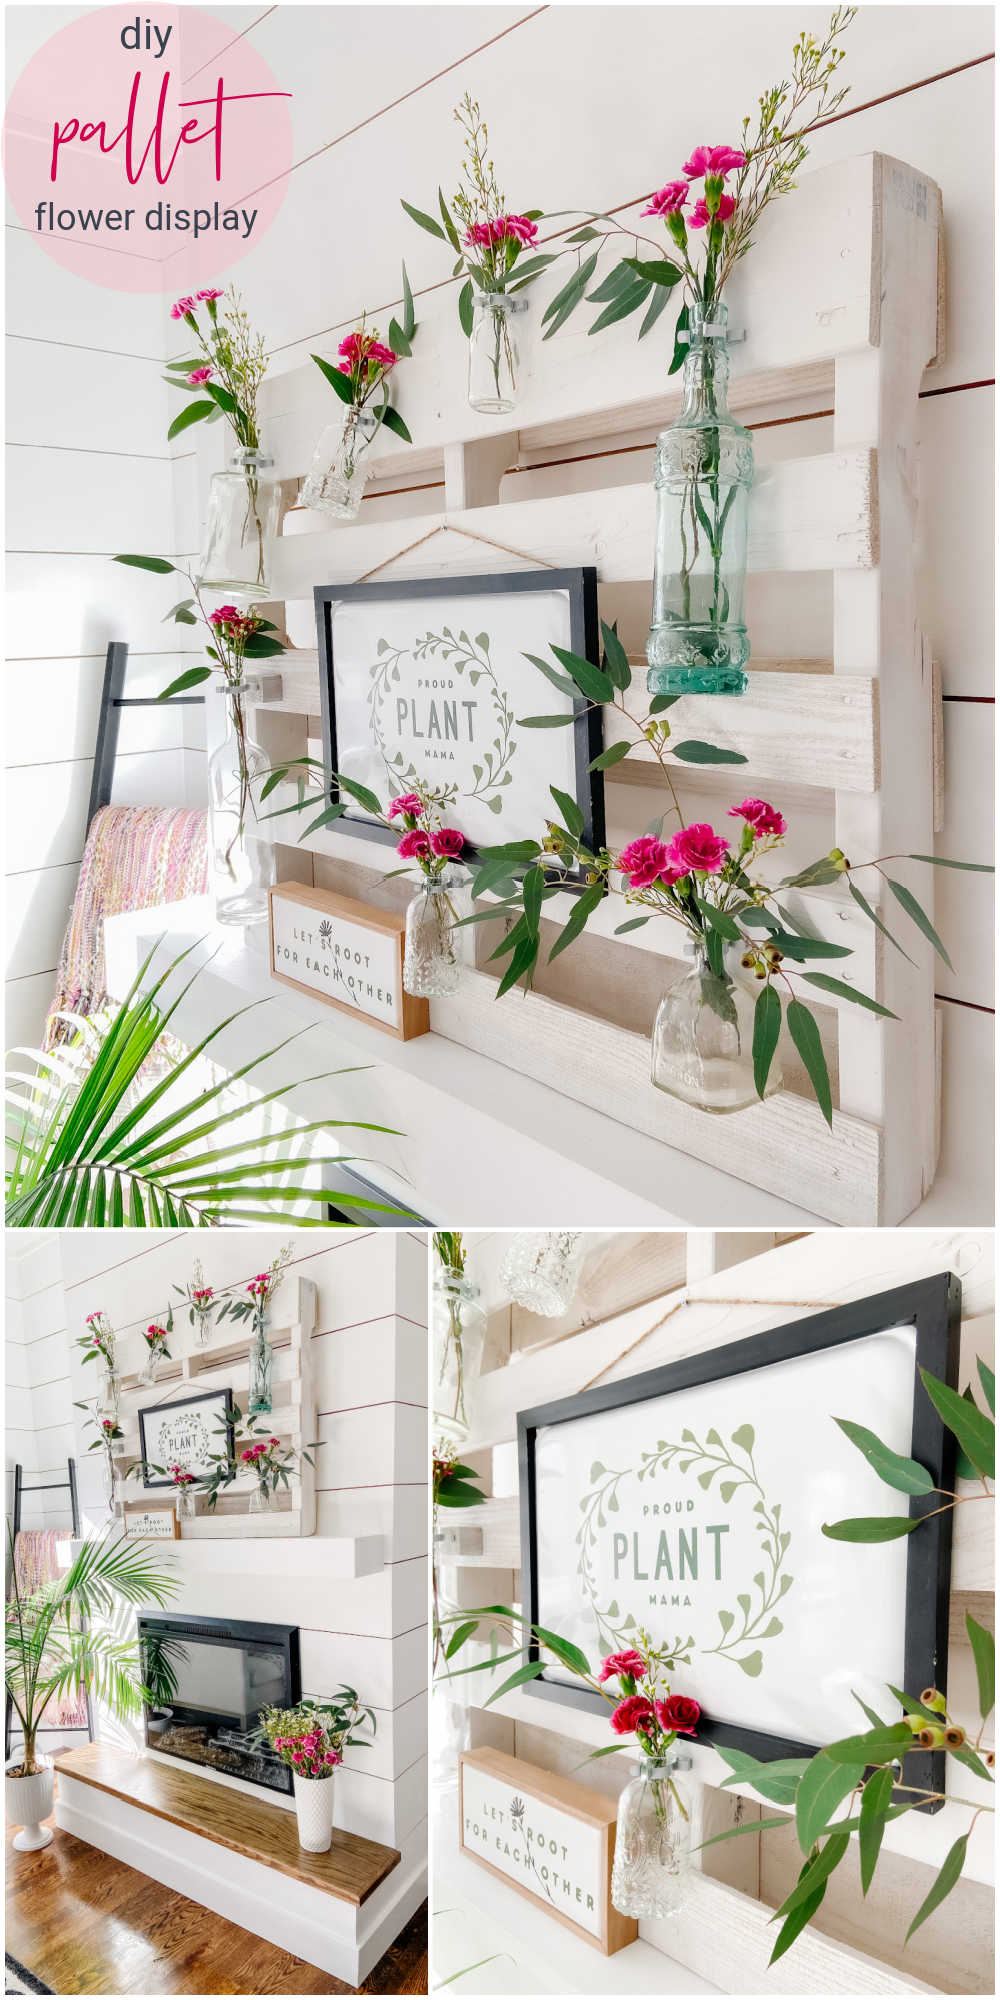 DIY Spring Pallet Flower Mantel. Turn a free pallet into a beautiful vertical flower and sign display that can be changed out seasonally! 